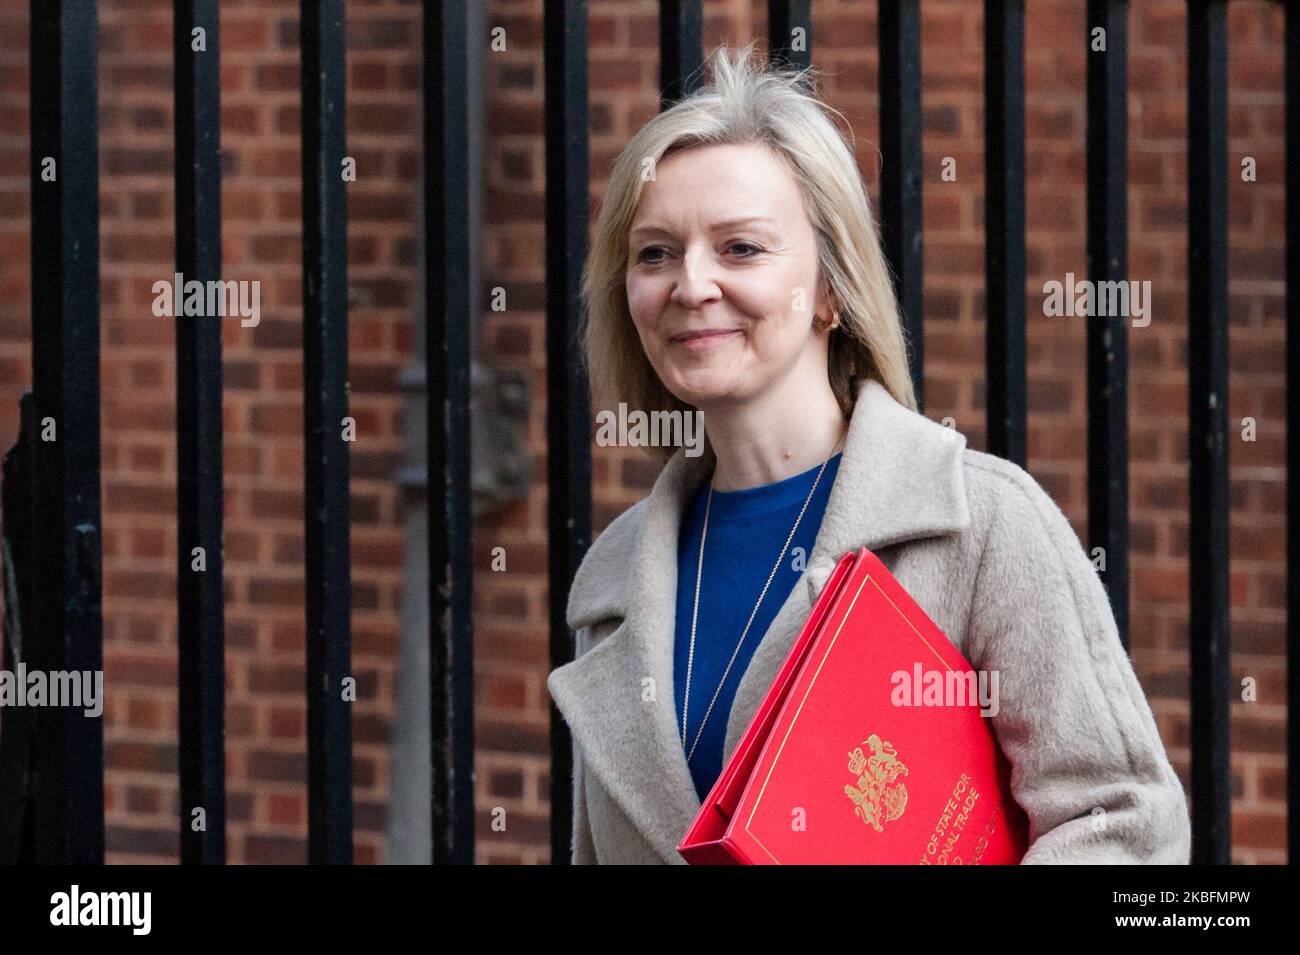 Secretary of State for International Trade and President of the Board of Trade, Minister for Women and Equalities Liz Truss leaves Downing Street after attending the National Security Council meeting convened by Prime Minister Boris Johnson to finalize the decision on the role of Chinese technology company Huawei in building of Britain's 5G digital network on 28 January 2020 in London, England. The decision comes a day ahead of US Secretary of State Mike Pompeo's visit to the UK and amid pressure from the White House administration who argue the Chinese technology poses a serious security risk Stock Photo